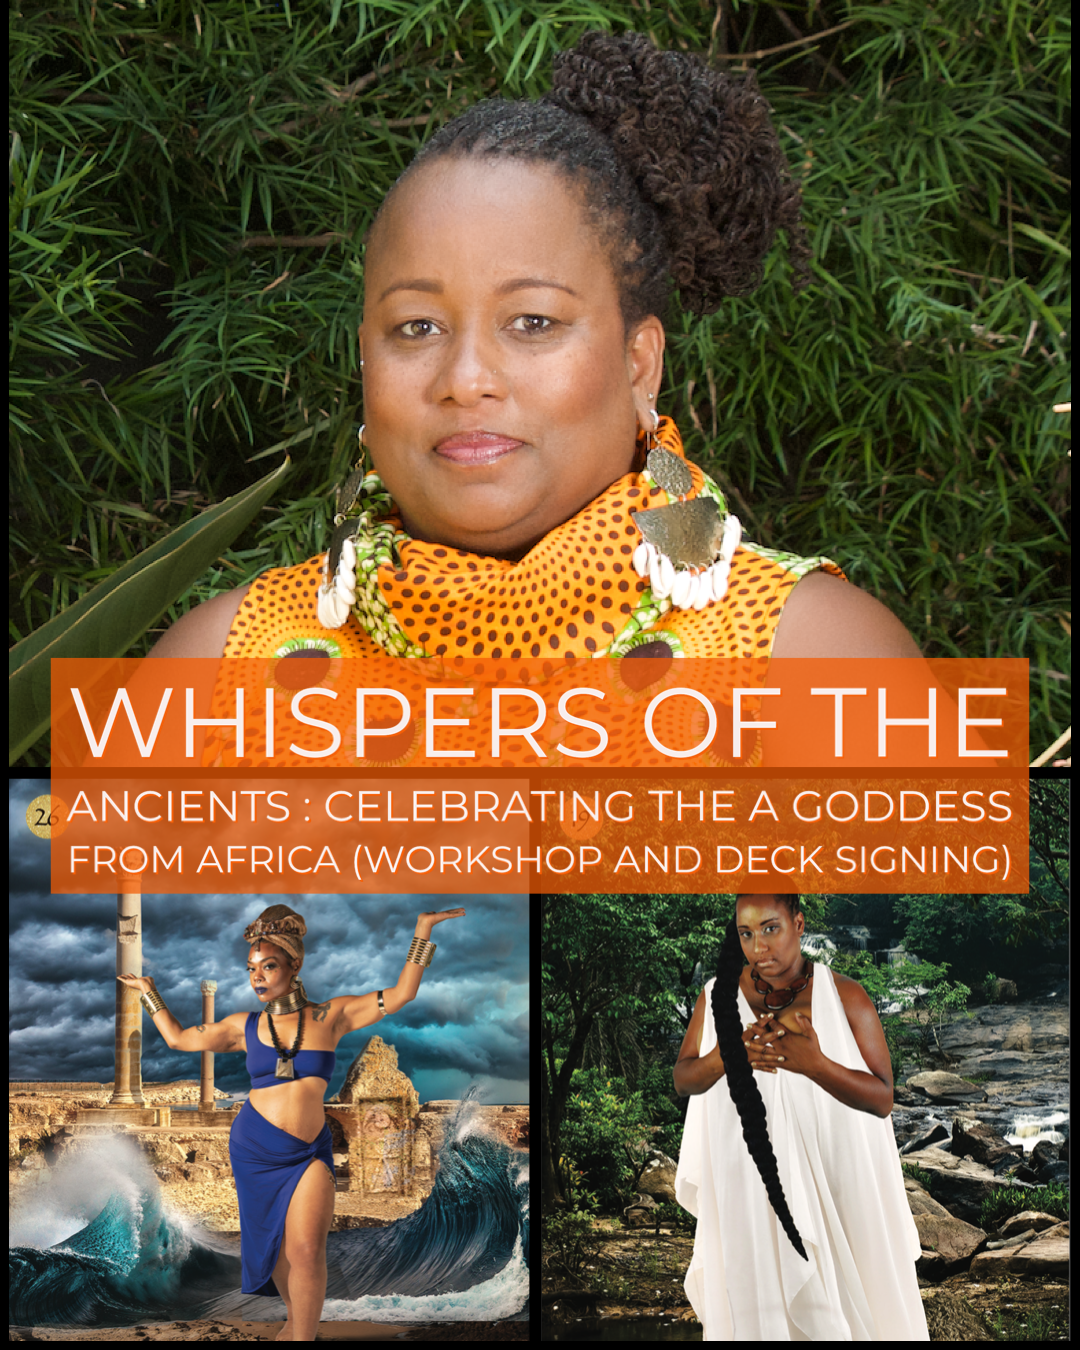 Whispers of the Ancients: Celebrating the Goddesses from Africa - Author Talk, Workshop & Deck Signing